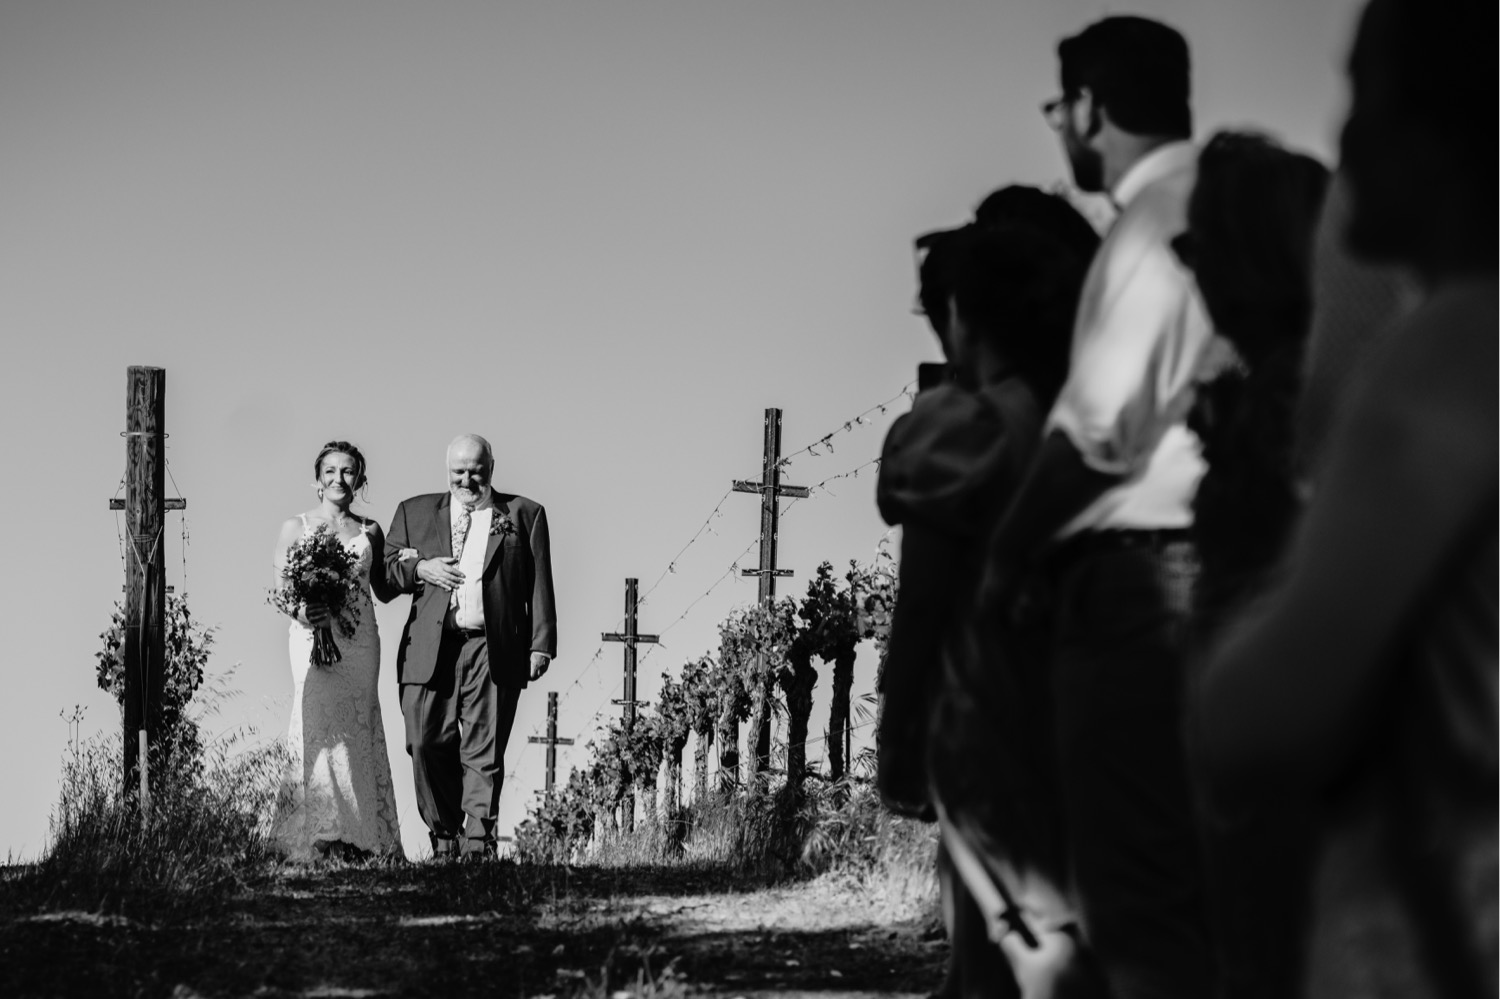 Father of the bride walks the bride down the aisle lined by vineyards. Liz Koston Photography.